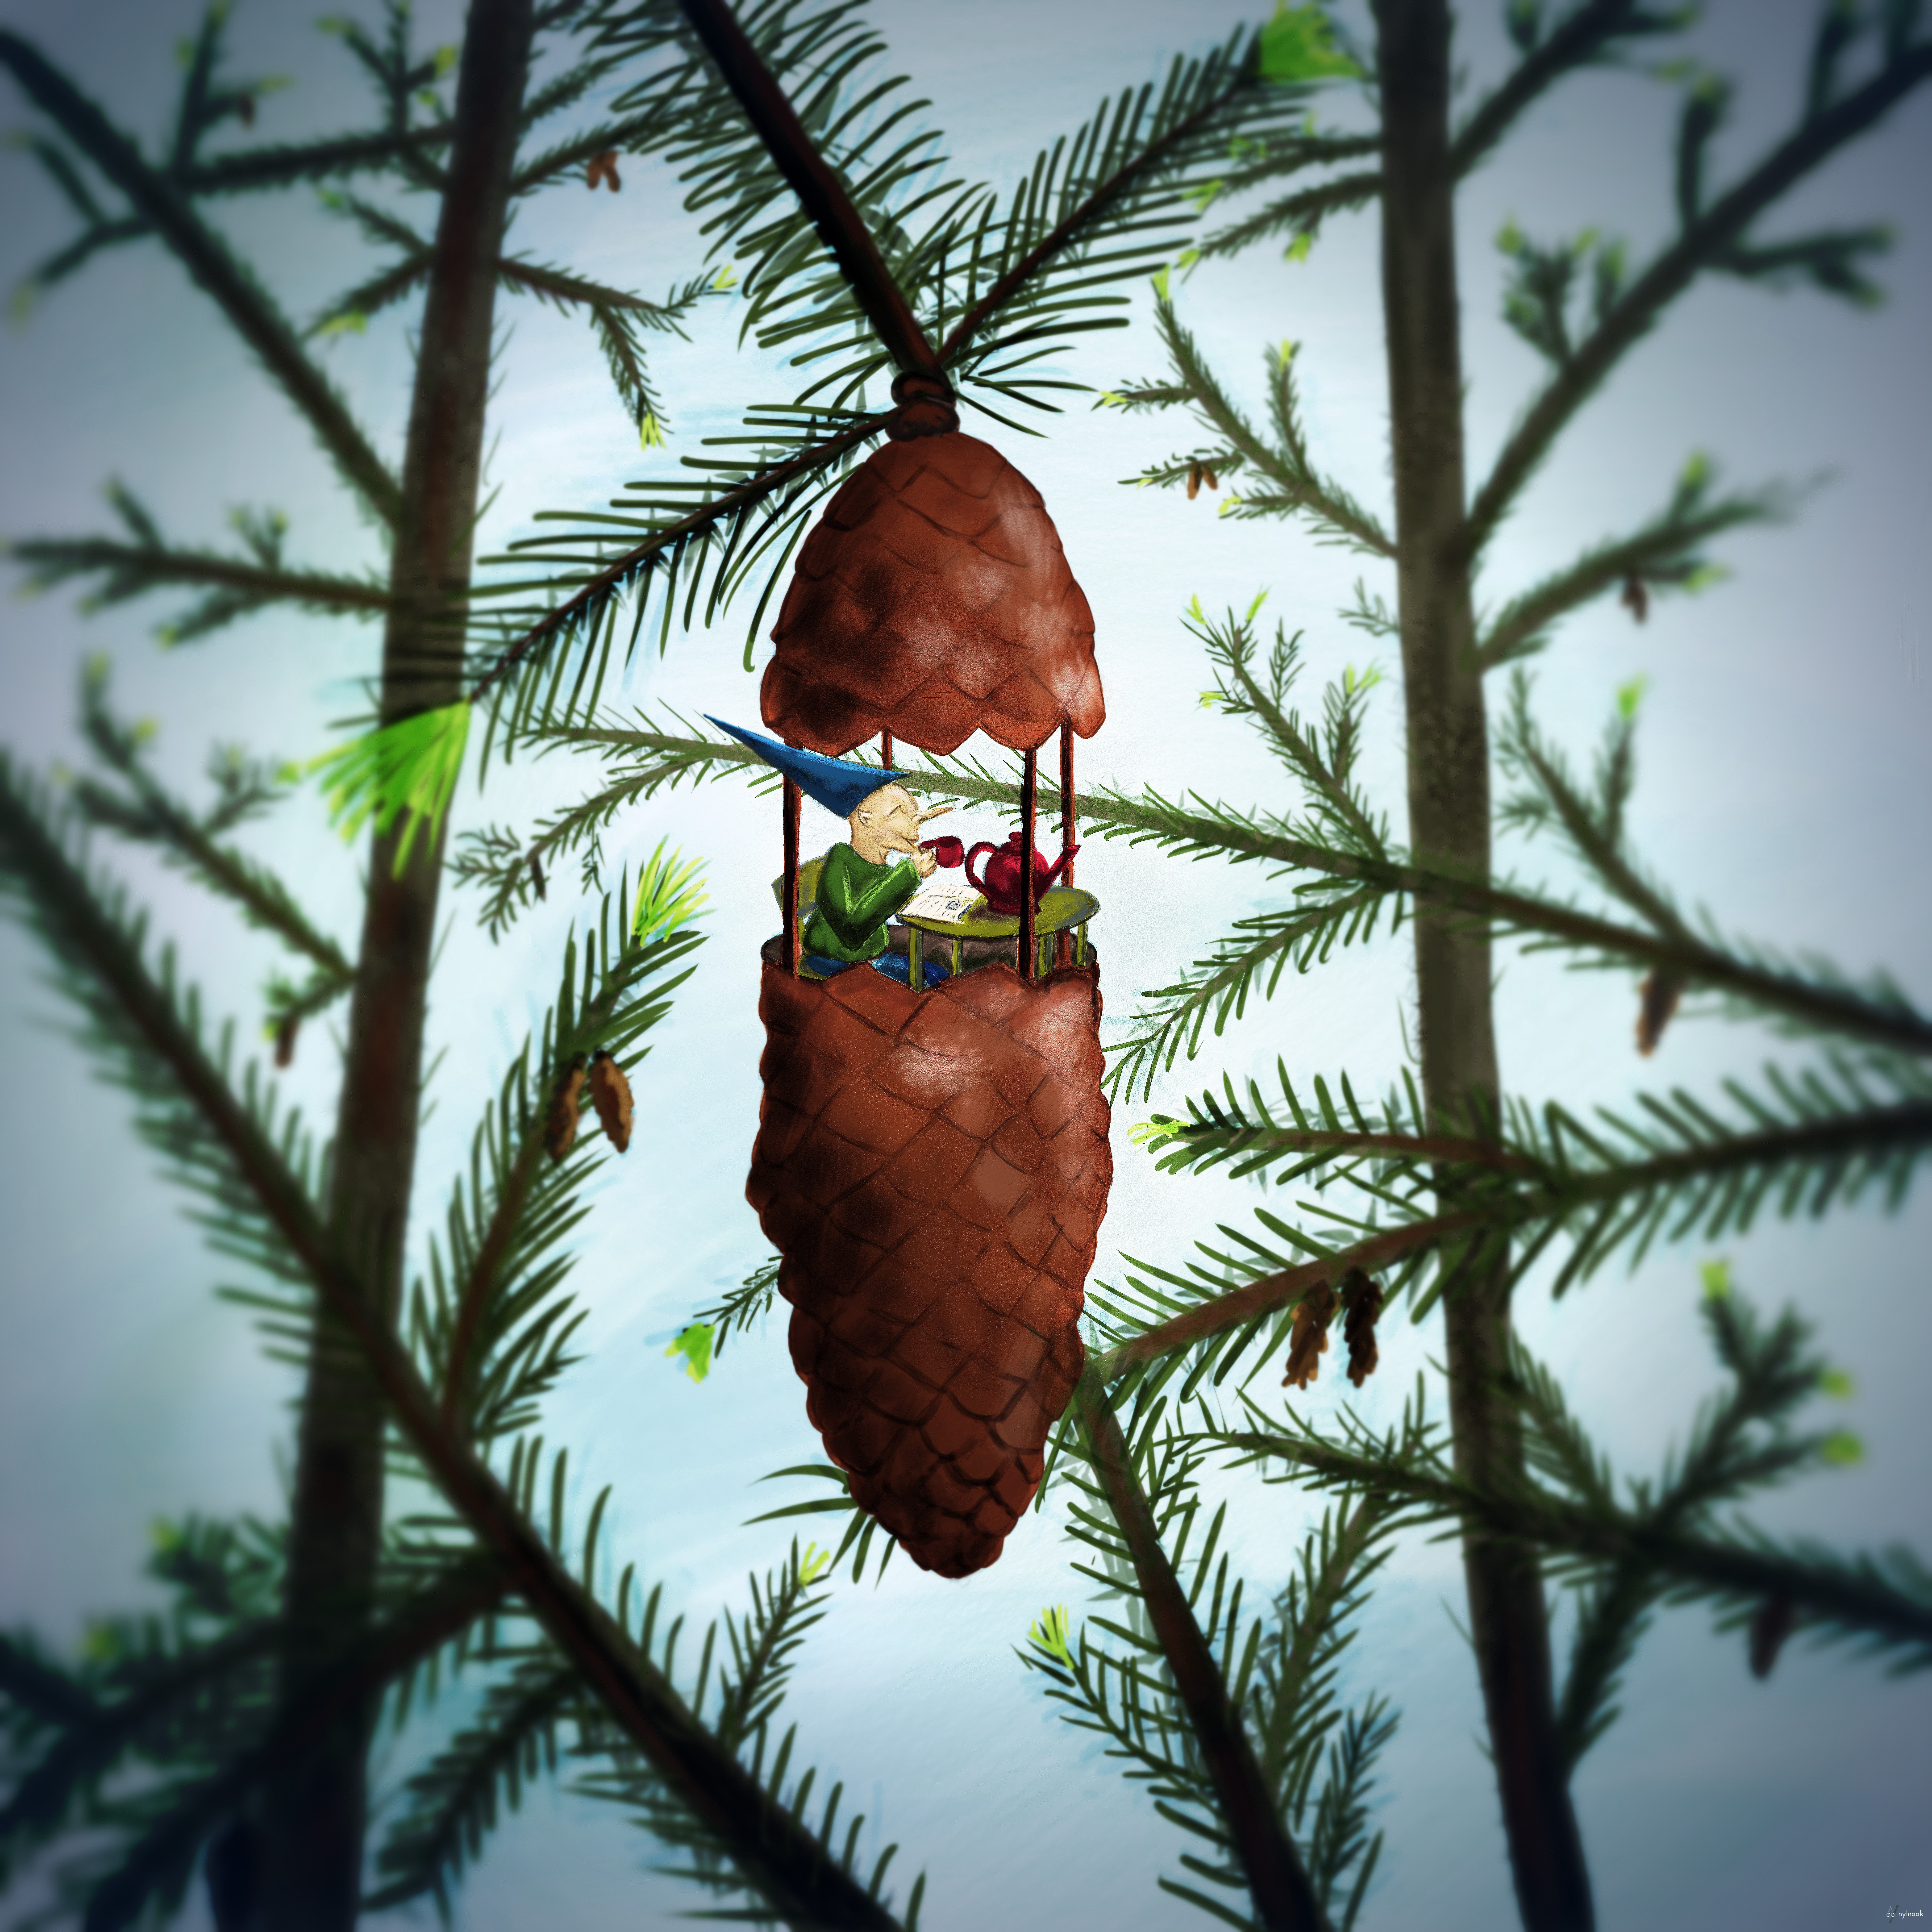 Wallpaper for mobile devices cone, bump, gnome, forest